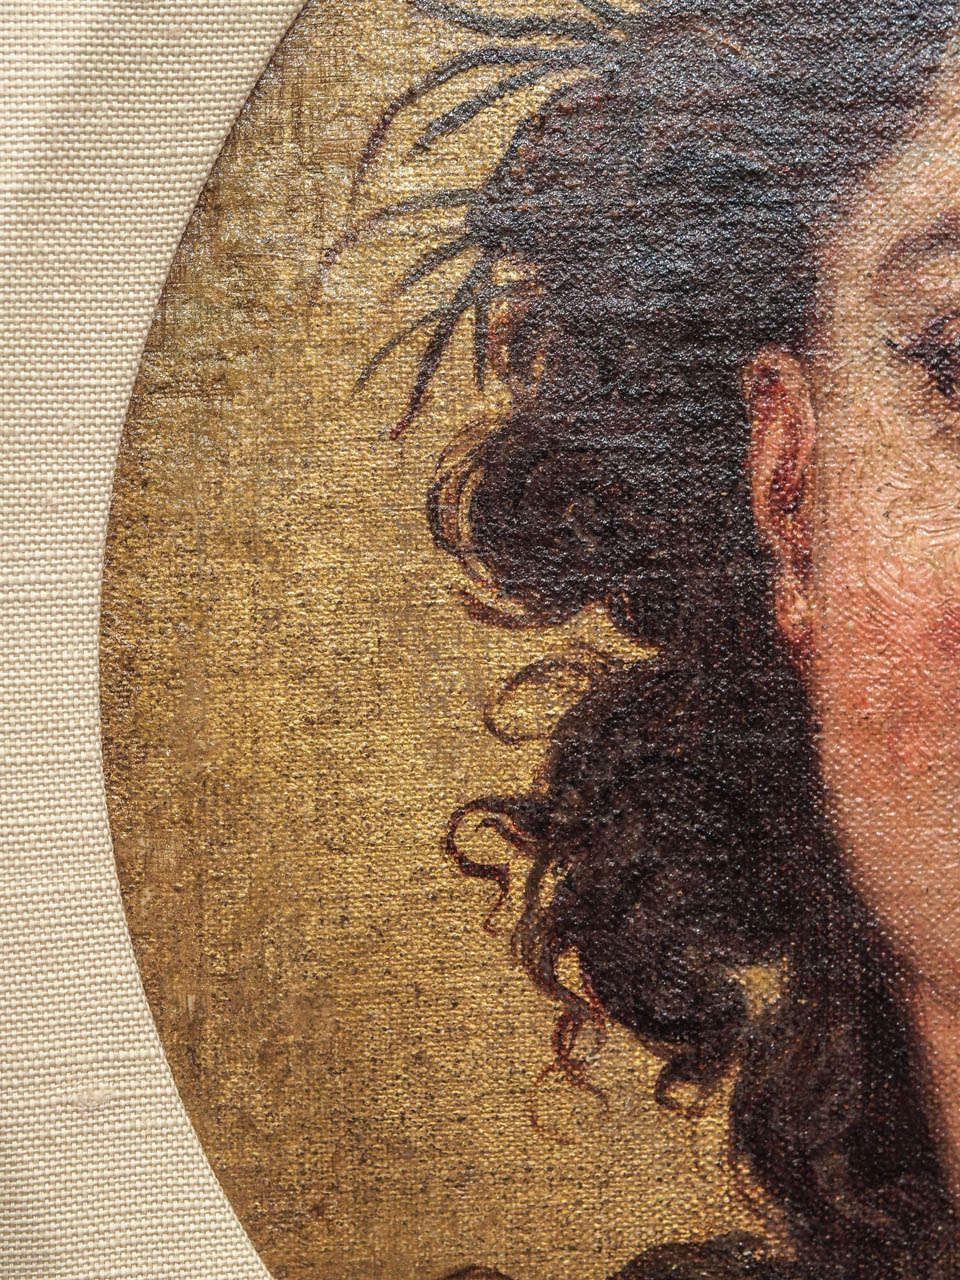 19th Century Portrait of Diana For Sale